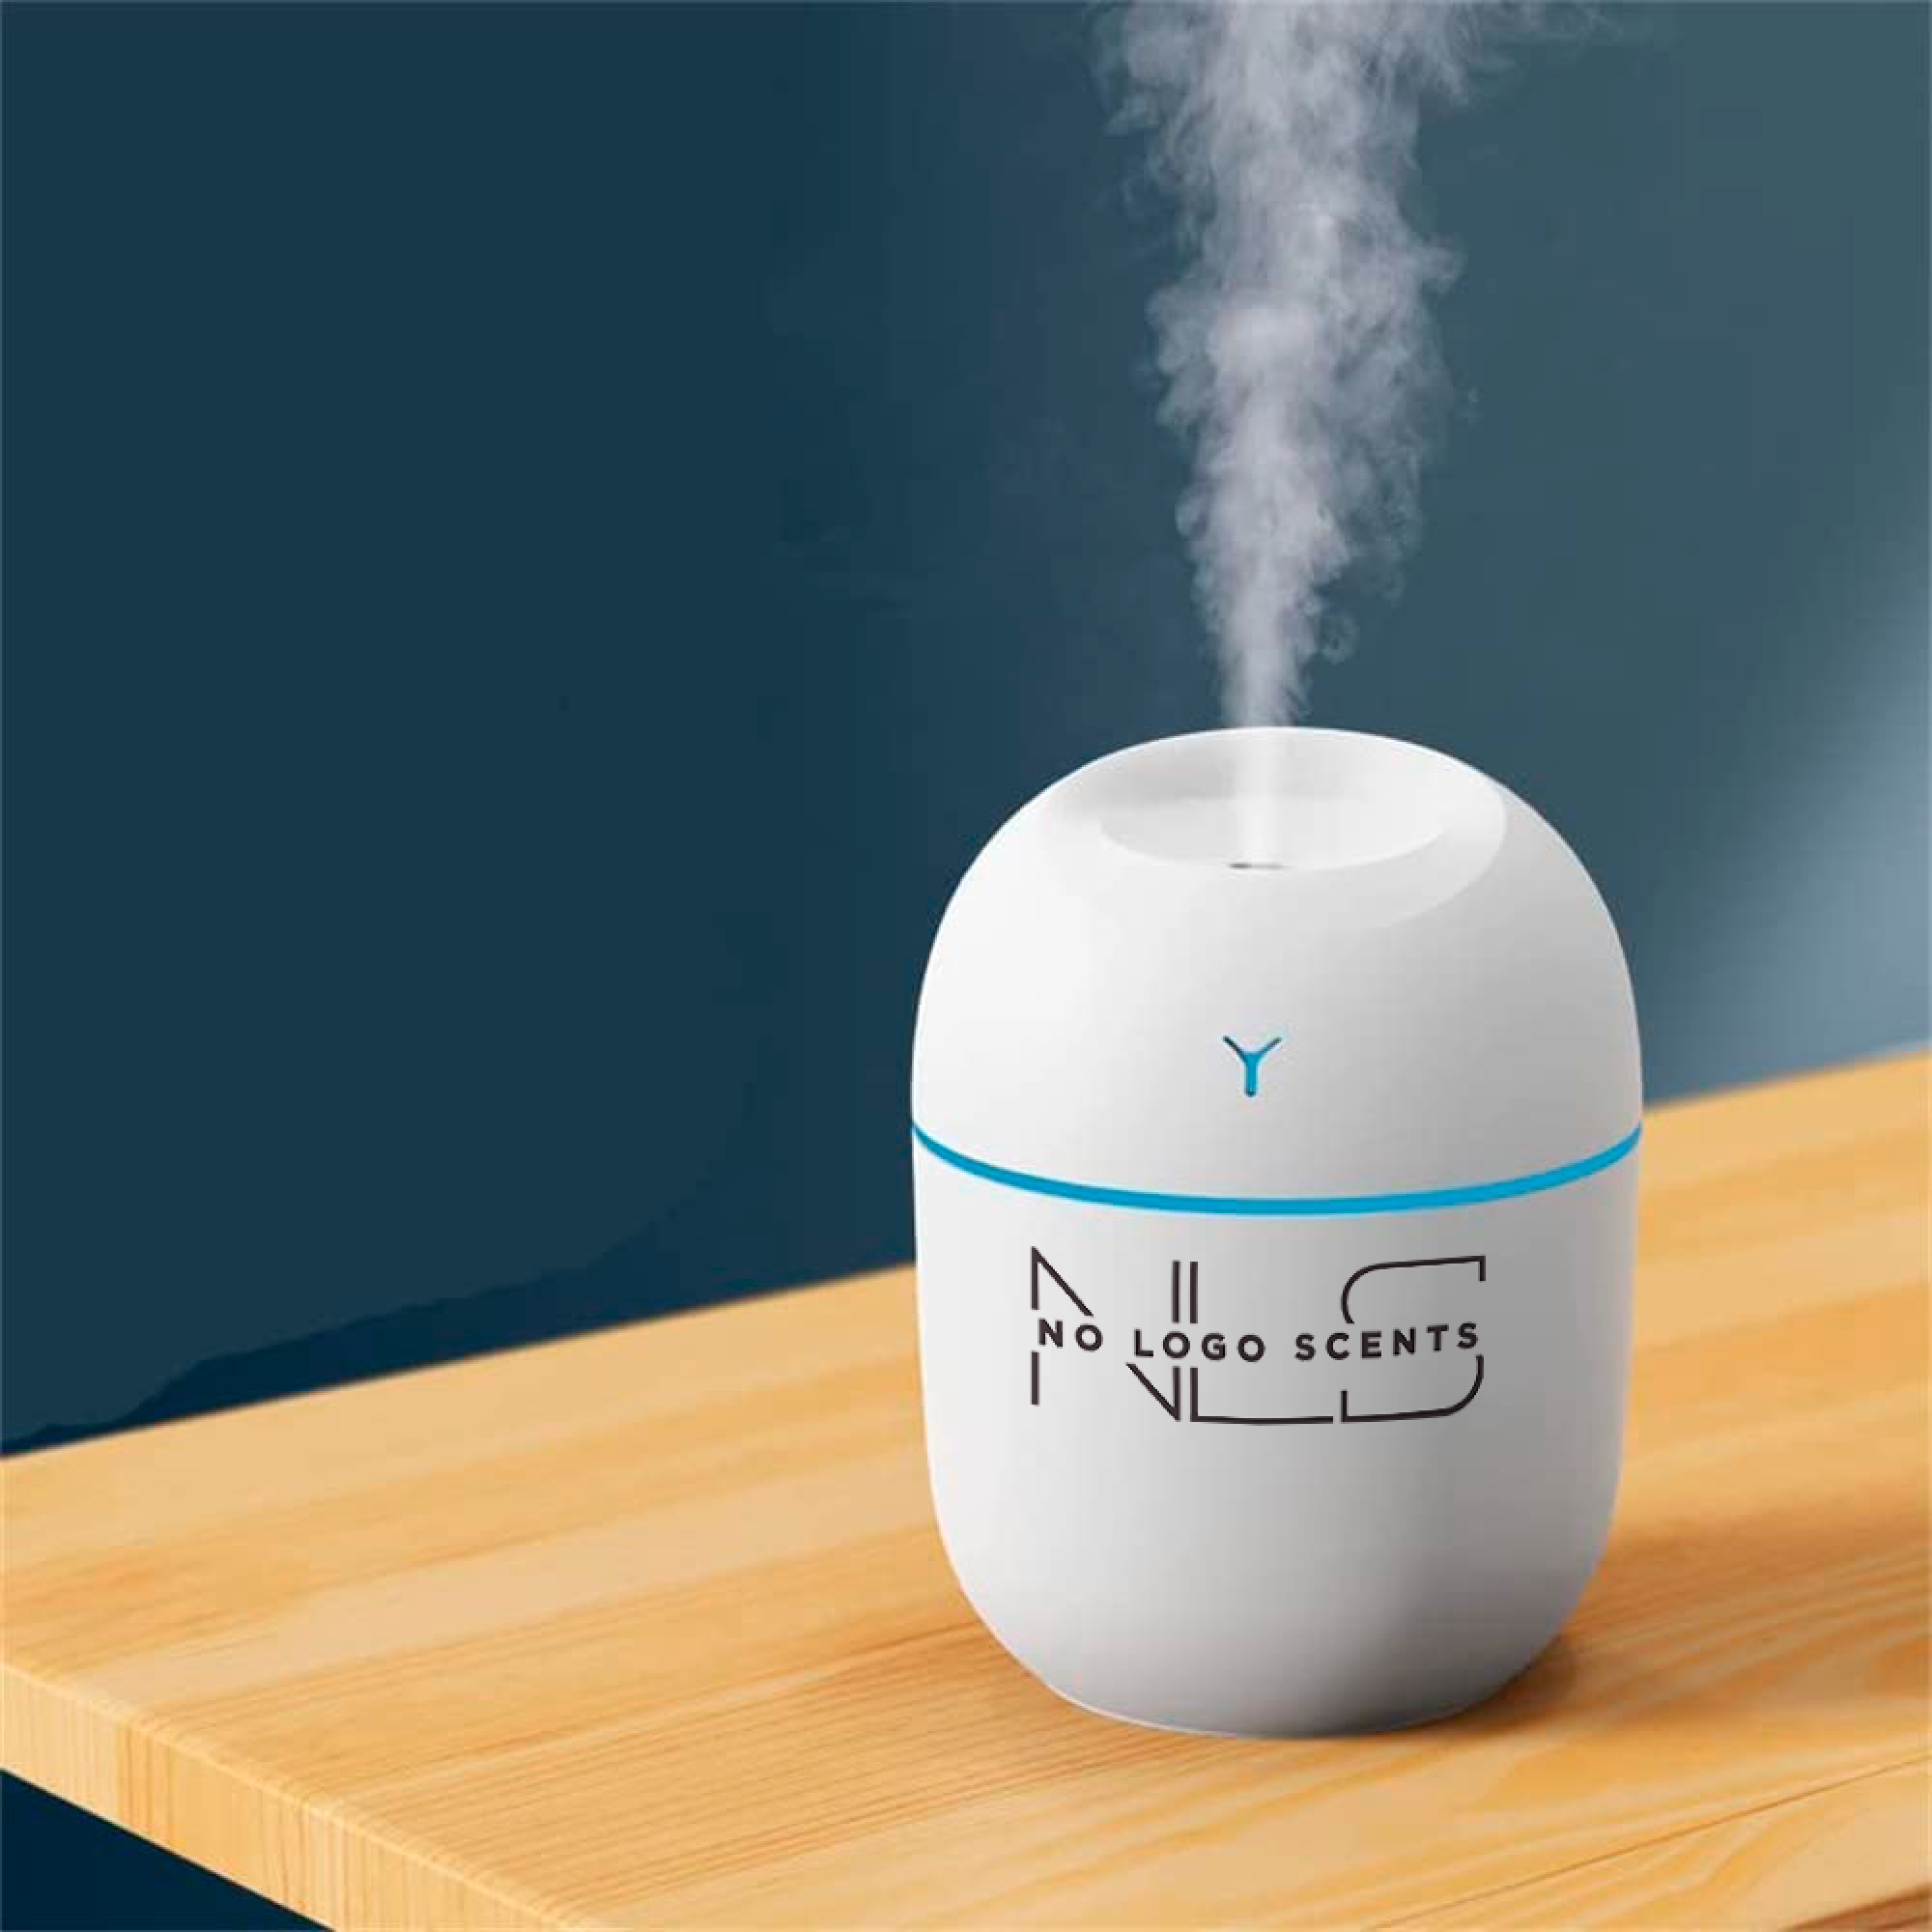 USB Humidifier & Oil Diffuser from category HOME & CAR - 2